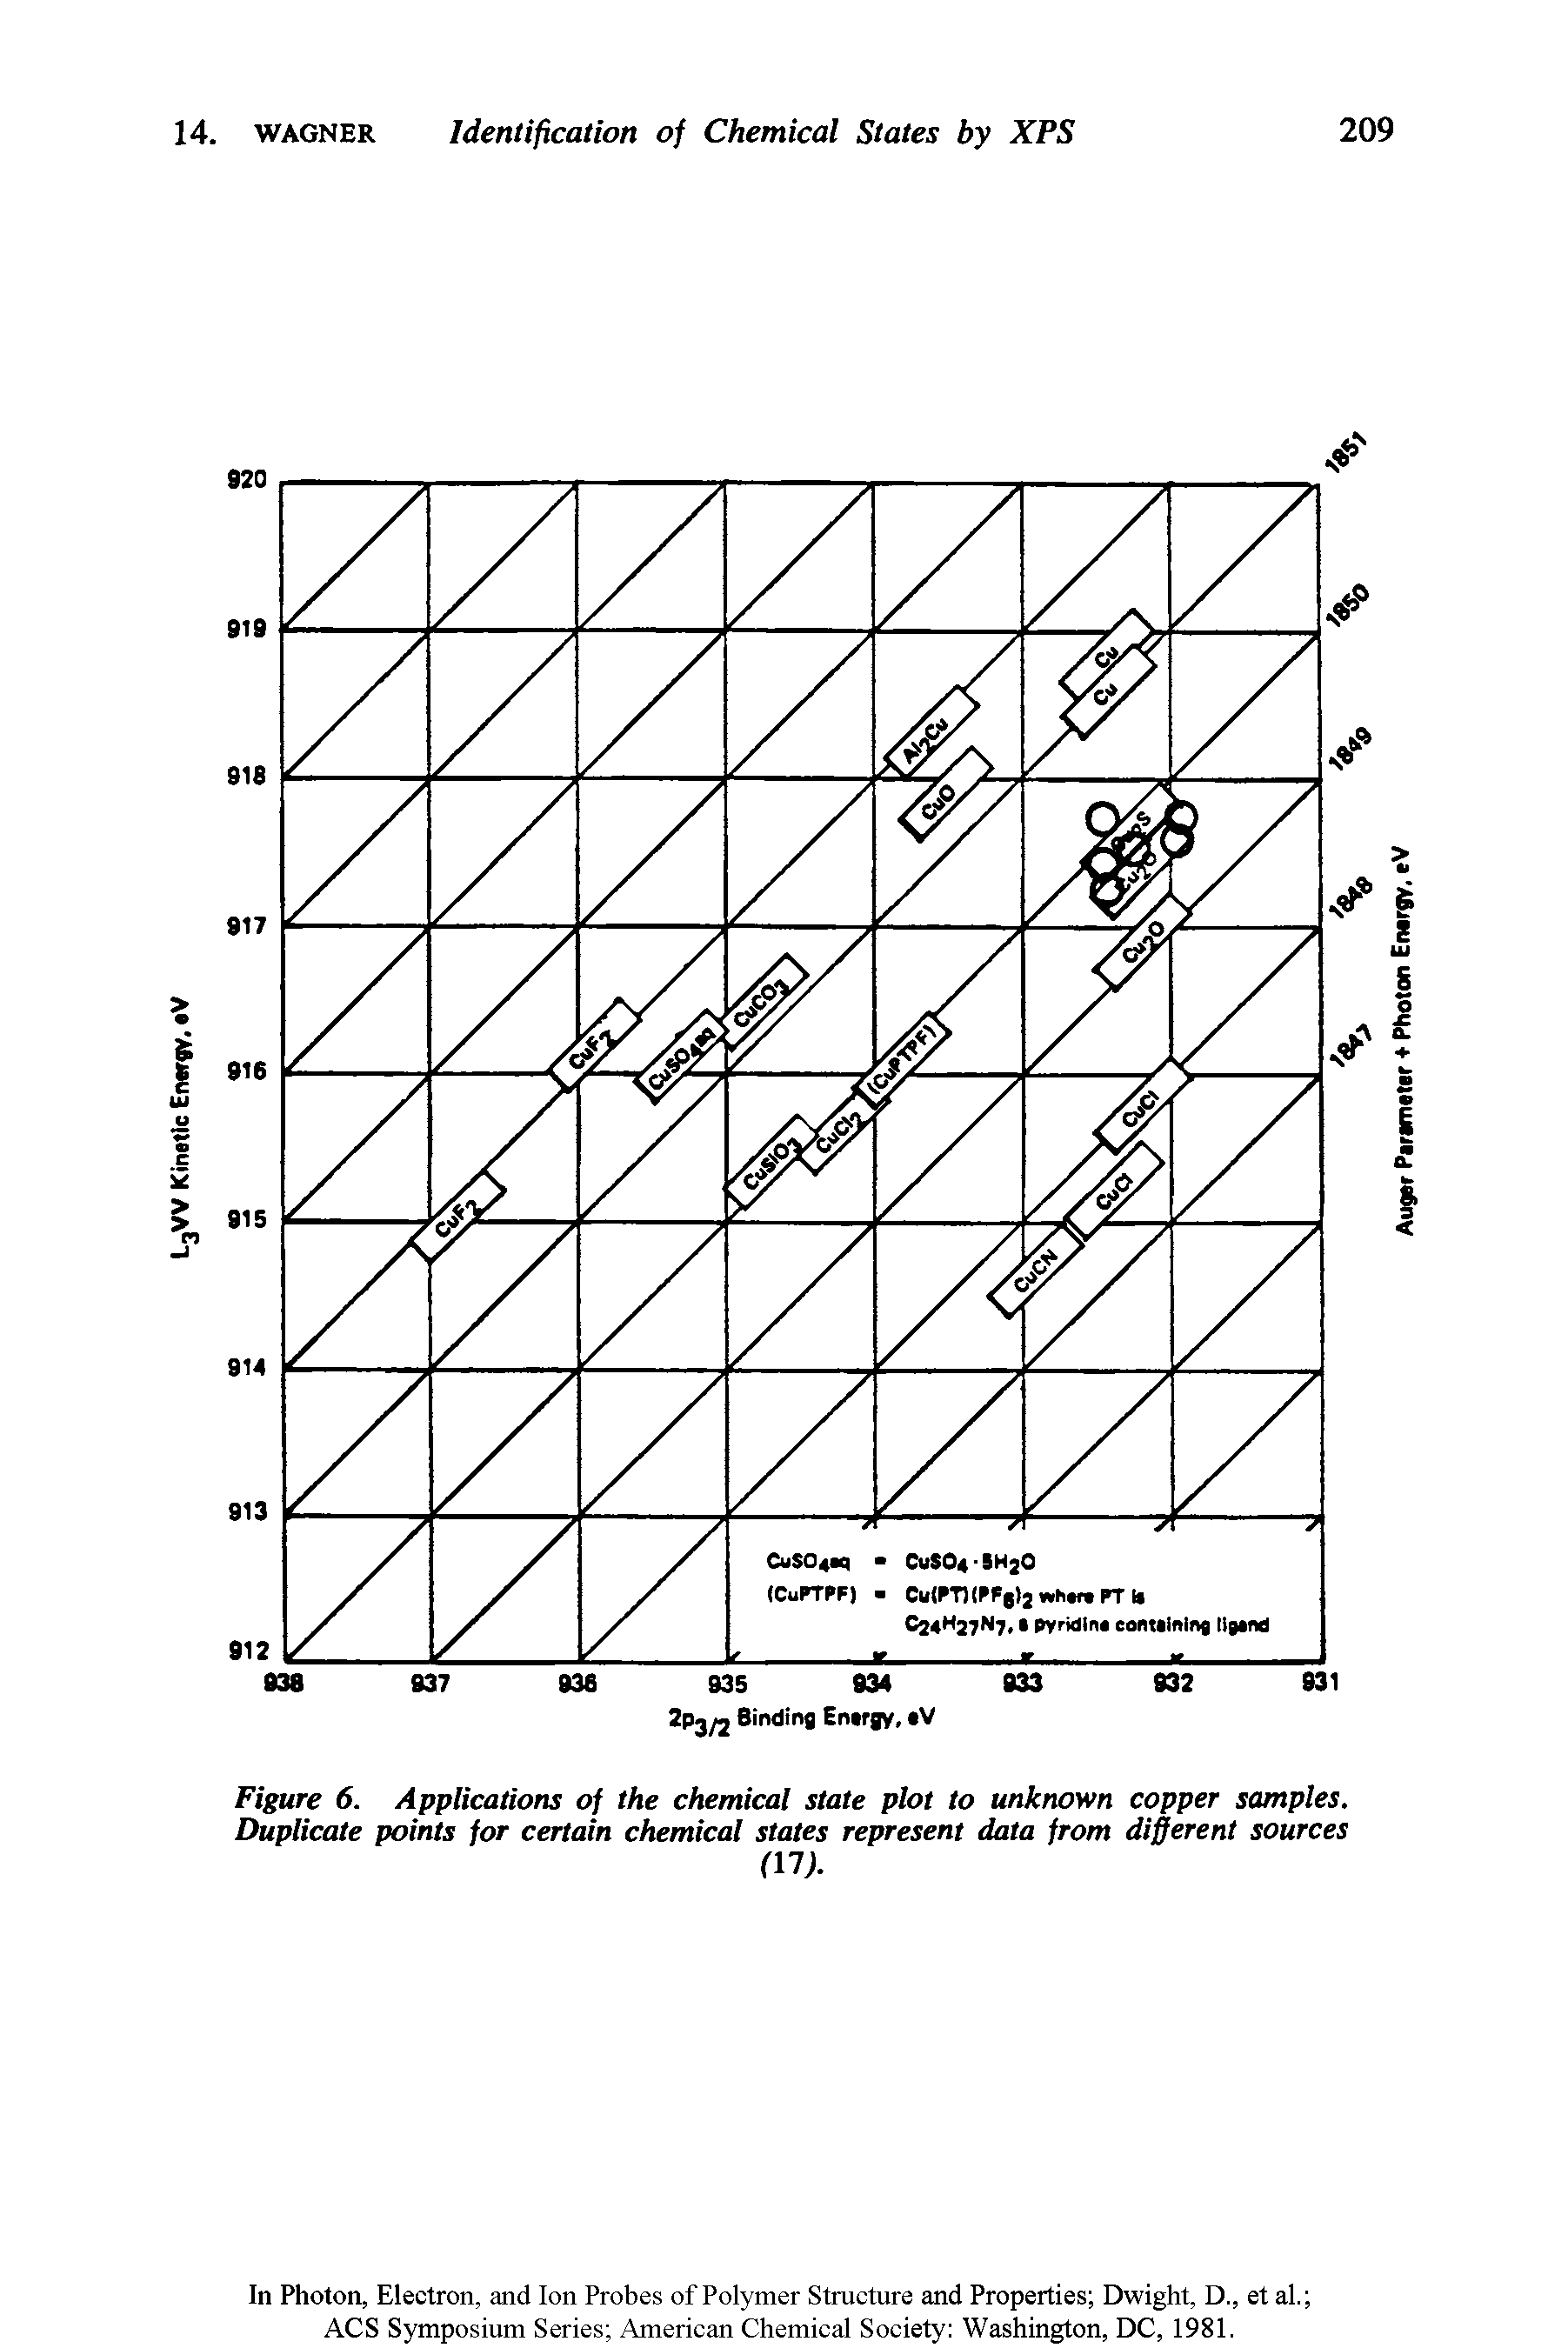 Figure 6. Applications of the chemical state plot to unknown copper samples. Duplicate points for certain chemical states represent data from different sources...